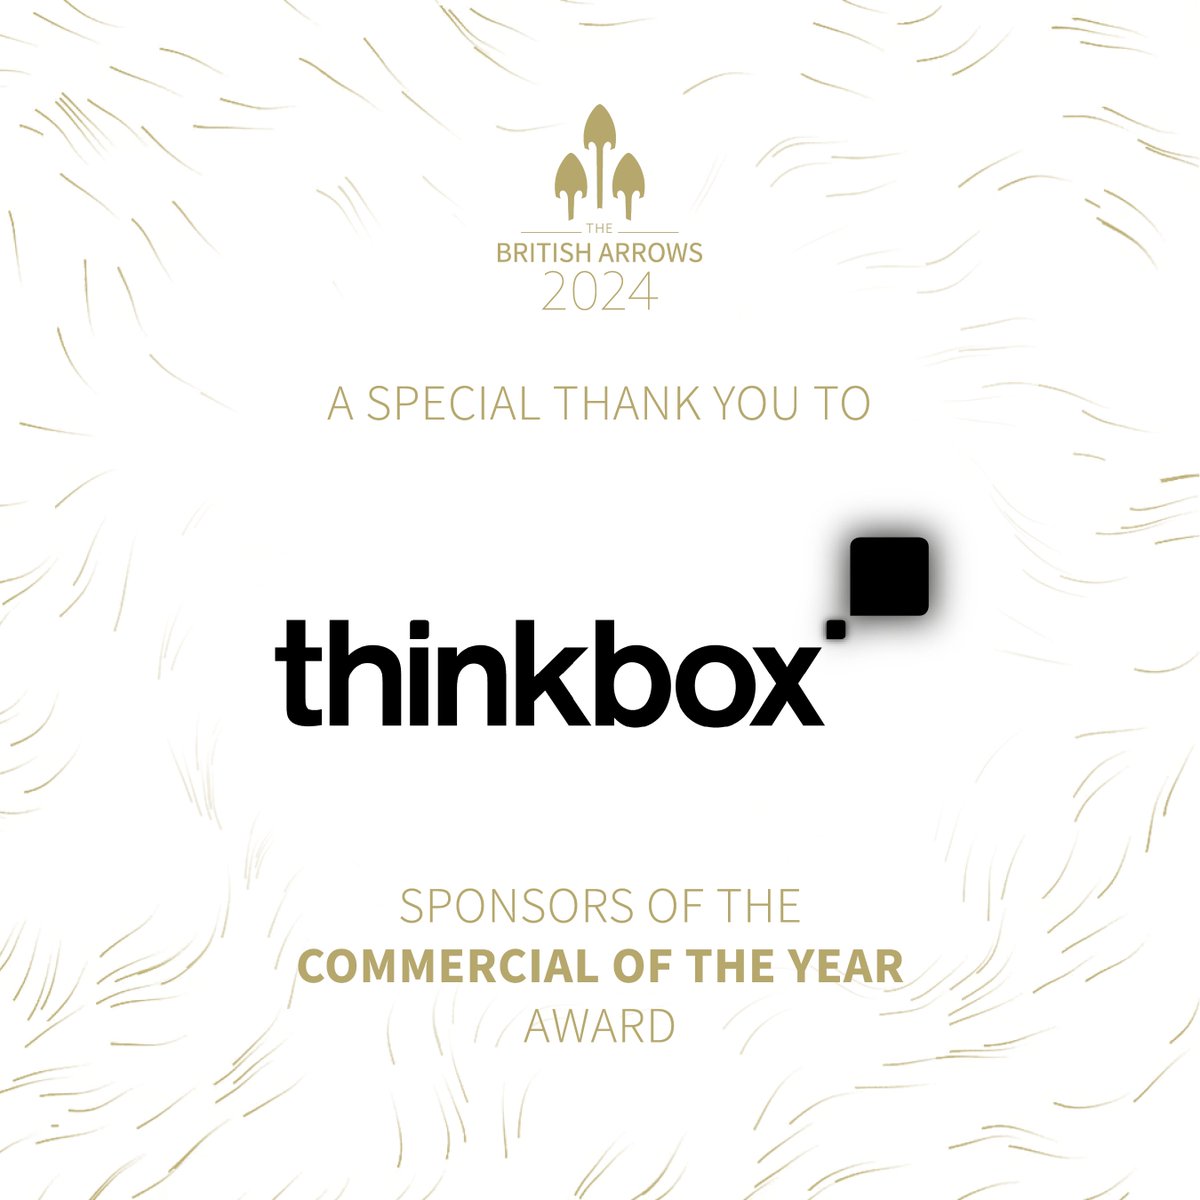 A special thank you to Thinkbox Sponsors of the Commercial of the Year Award #BA23 #BA23 #BritishArrows #advertising #award #celebration